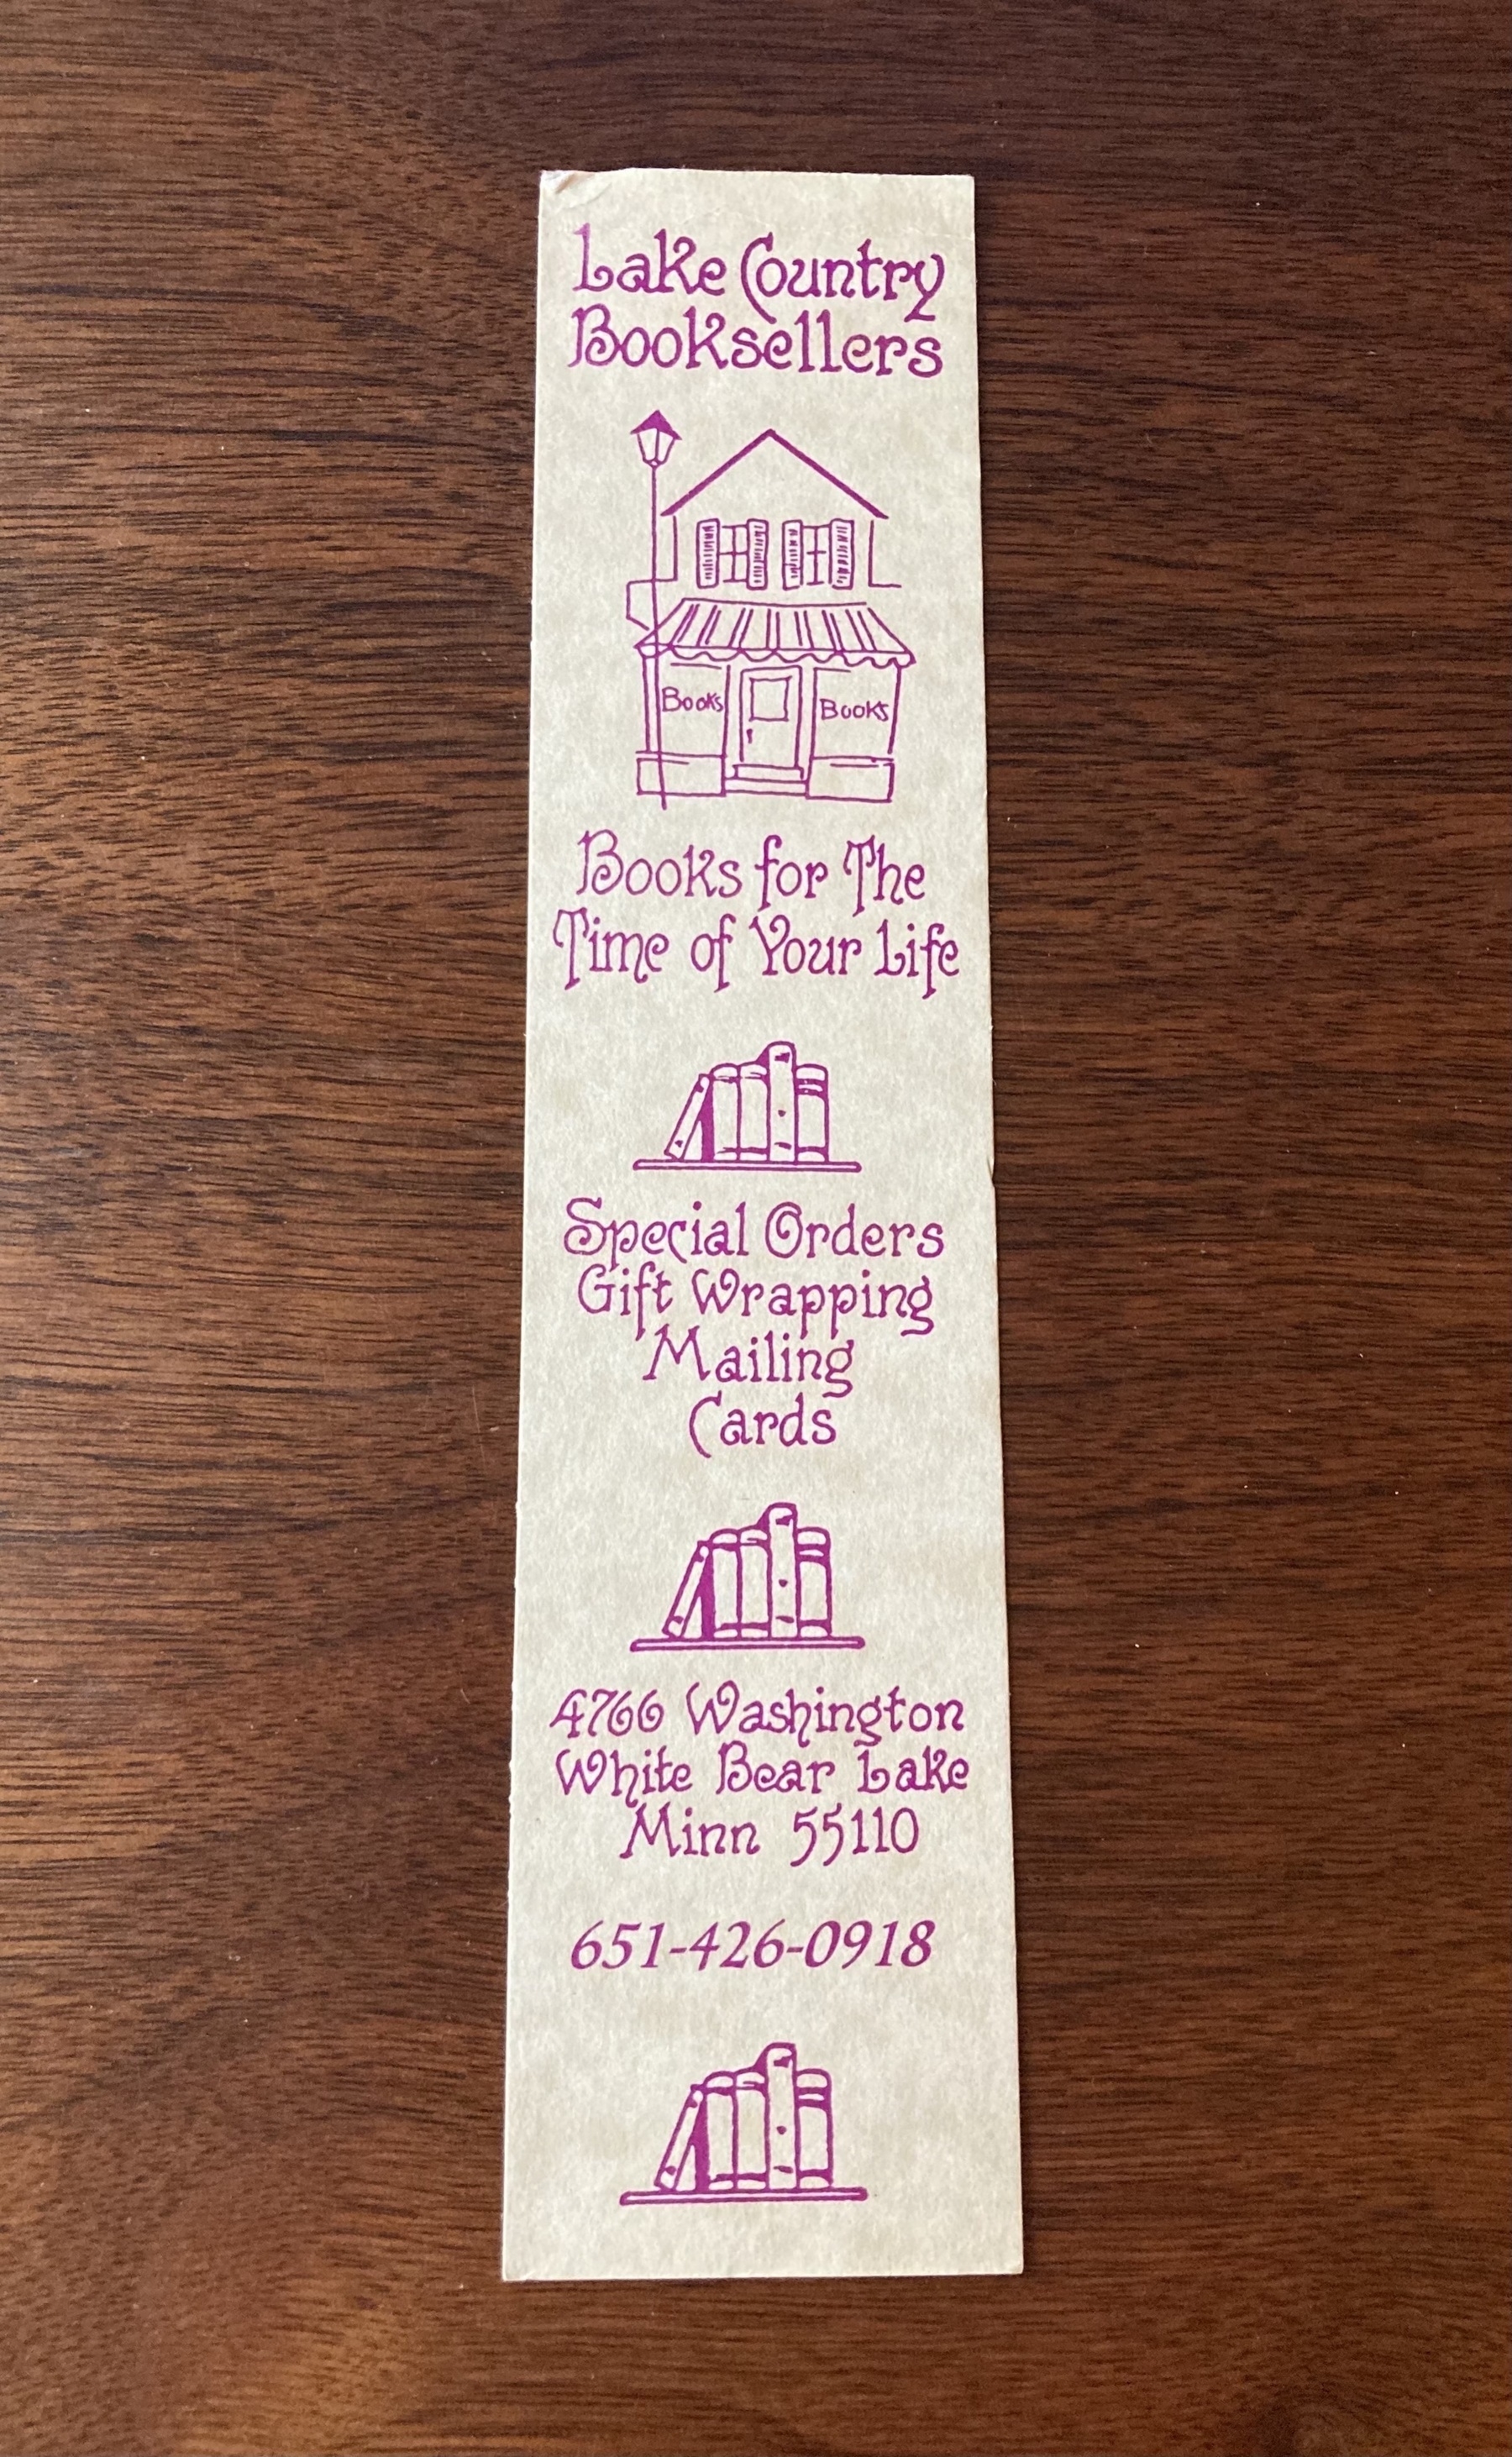 Bookmark for Lake Country Booksellers in White Bear Lake Minnesota